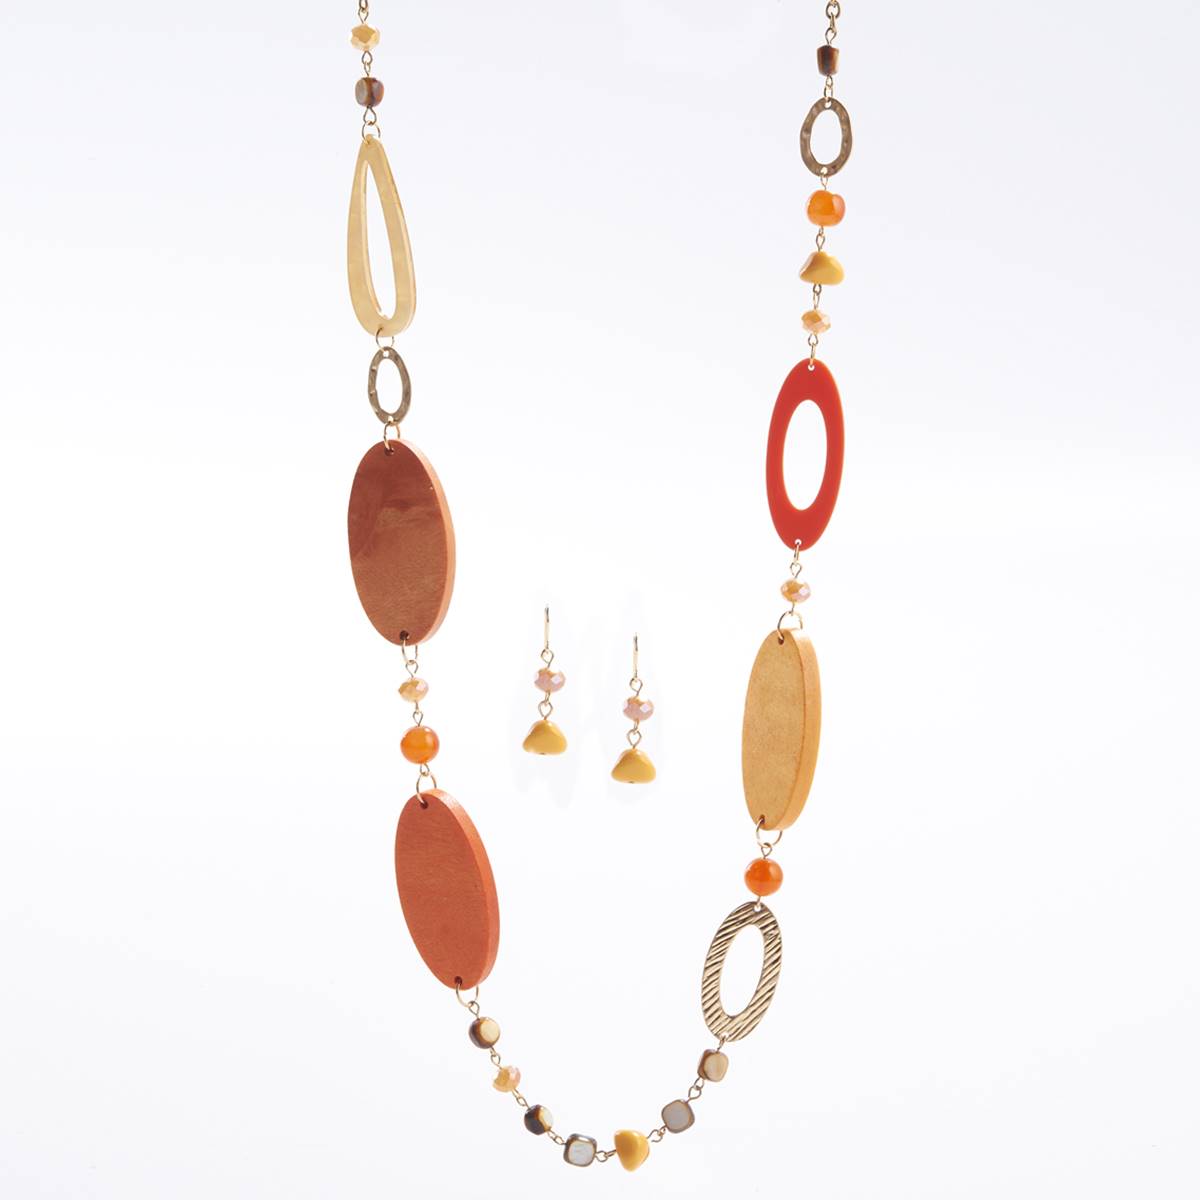 Ashley Cooper(tm) Ovals Rings & Beads Chain Necklace & Earrings Set